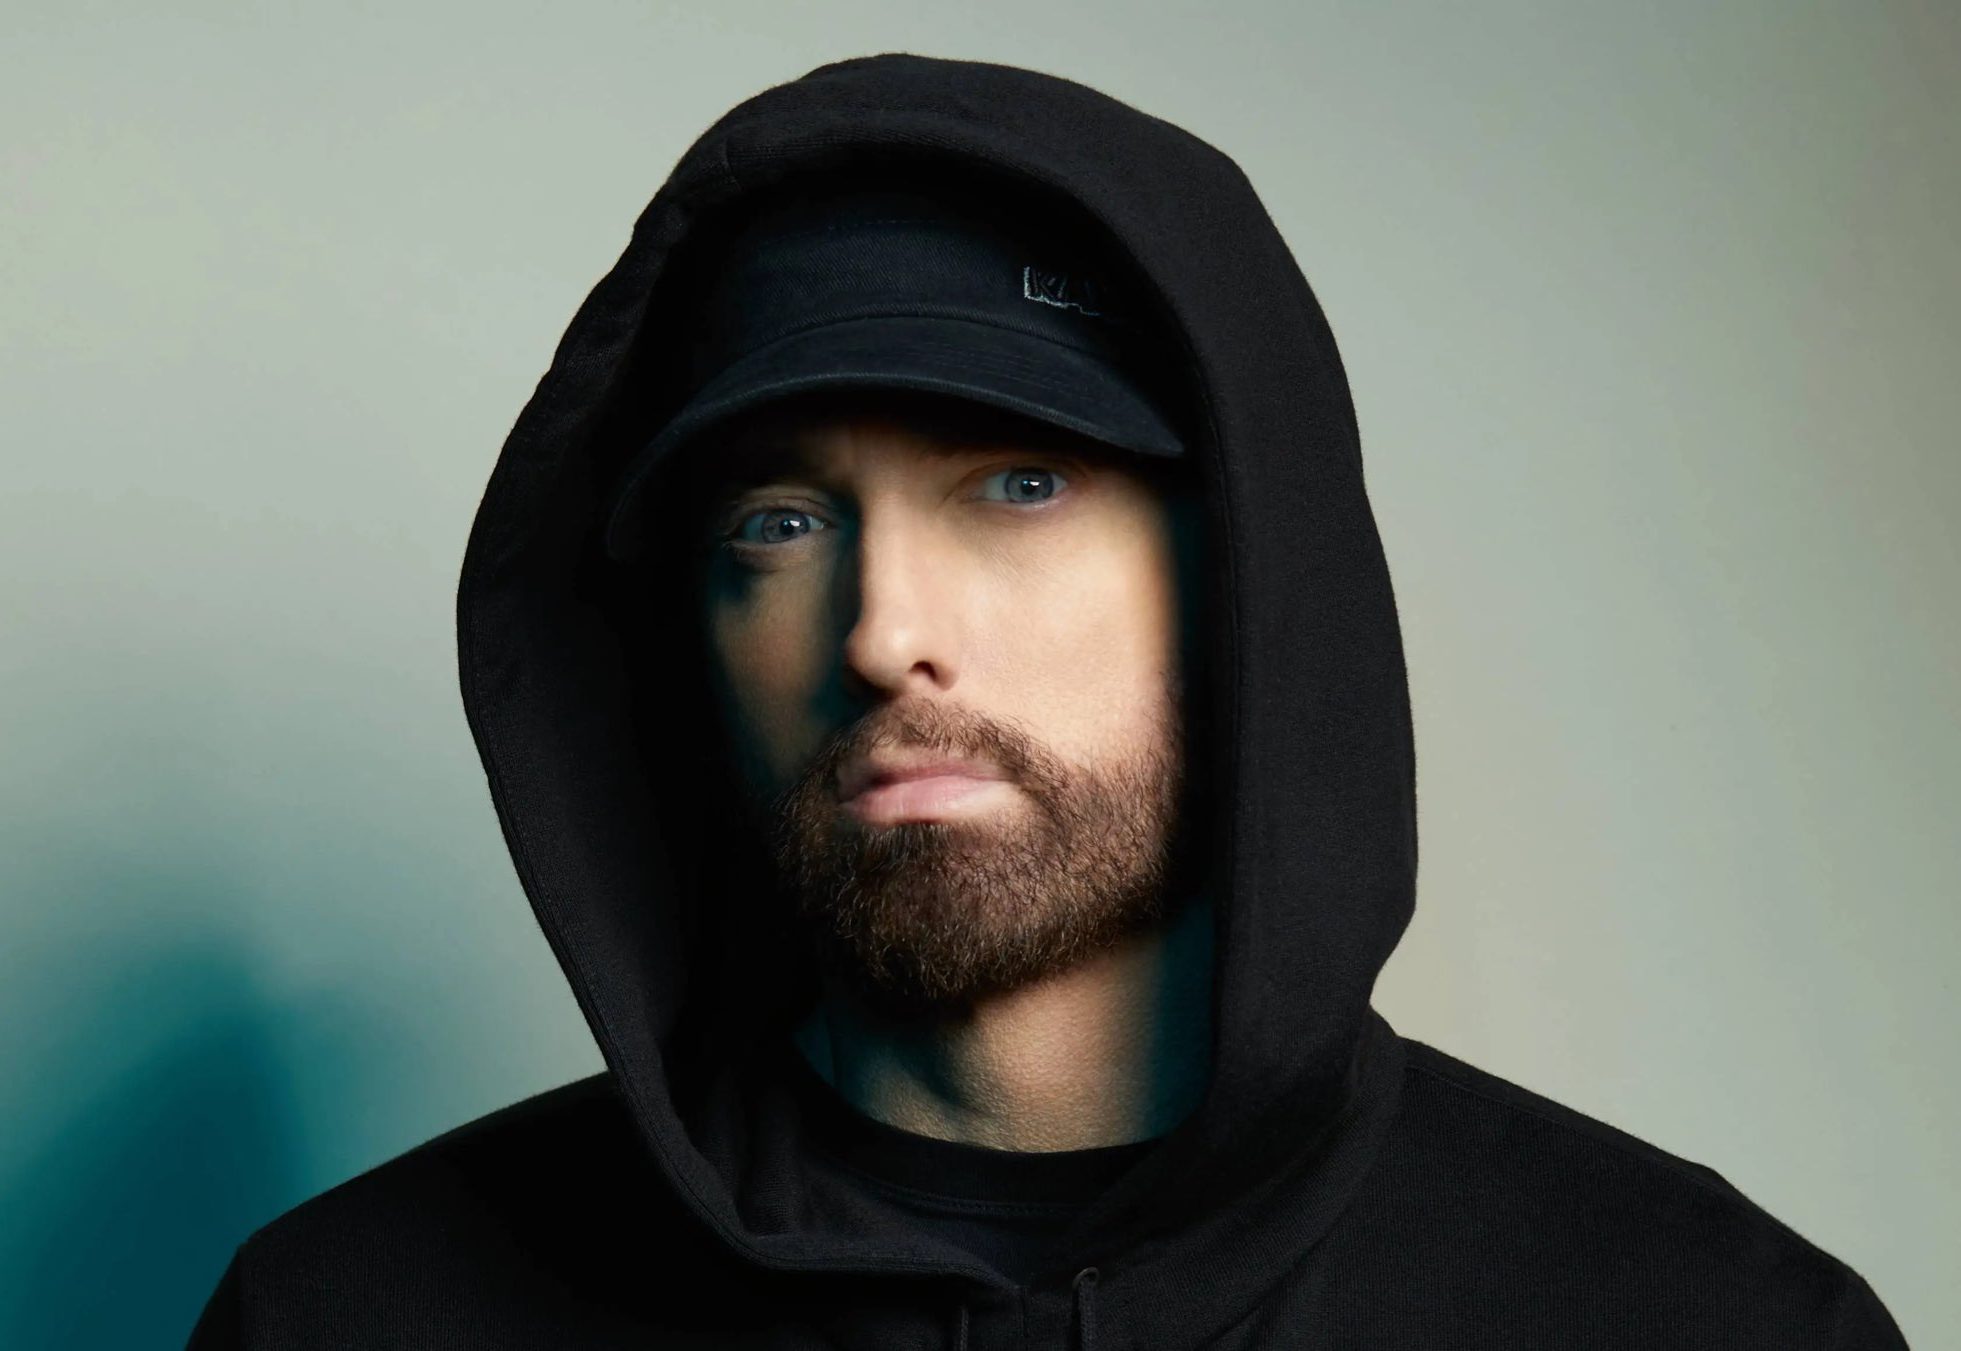 Eminem Comes Back From the Past in Video for New Single “Houdini”: Watch